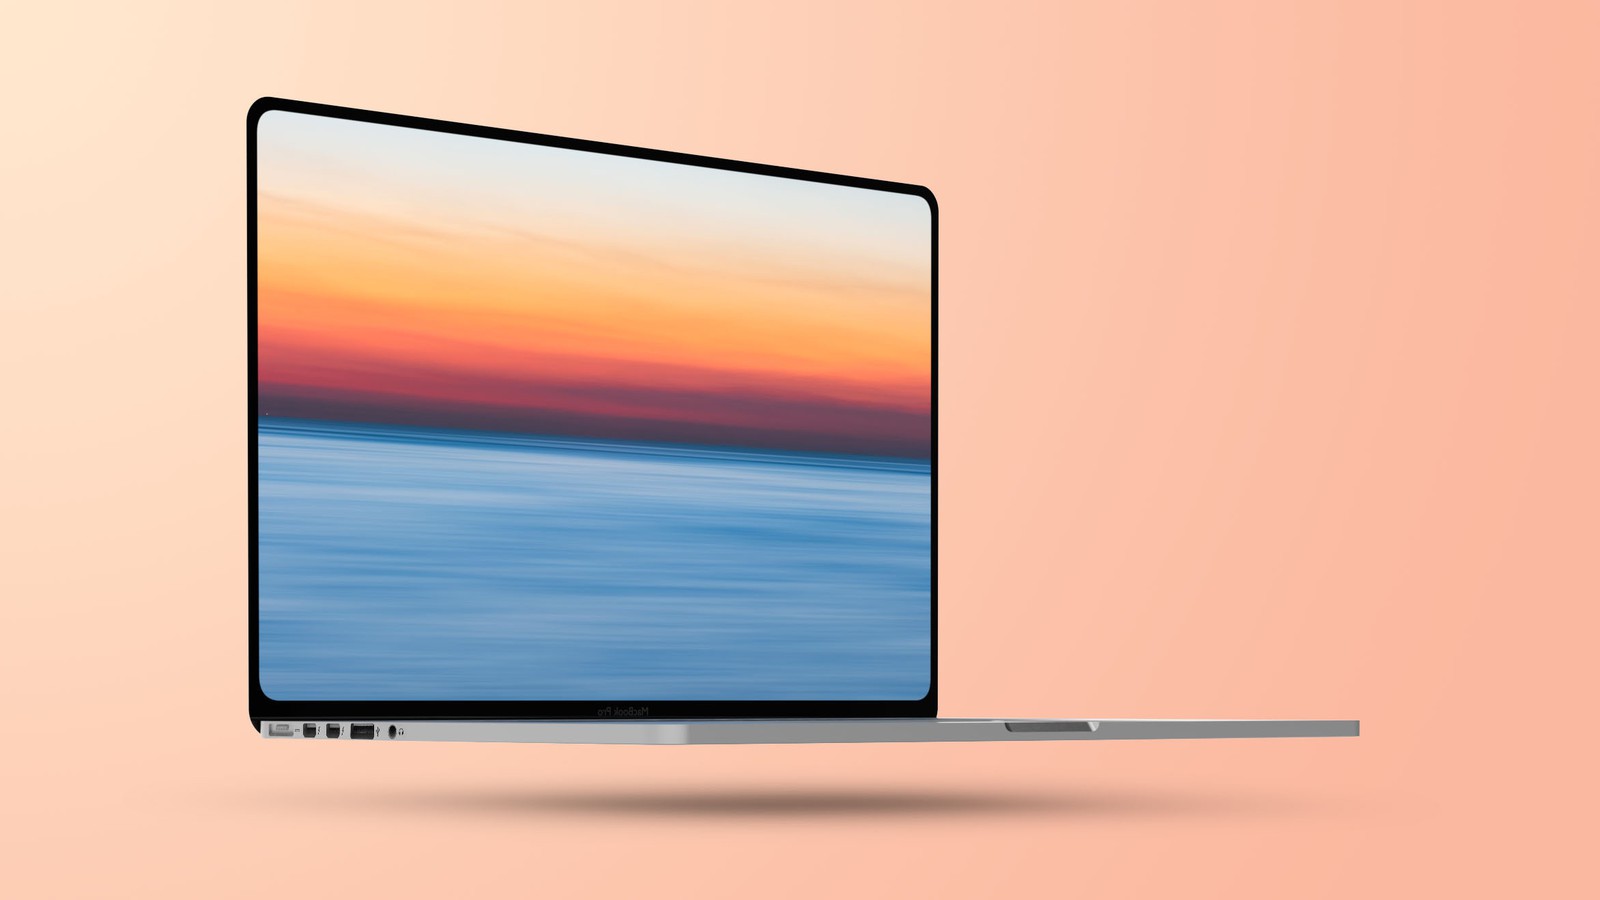 Apple's 2021 MacBook Pro refreshes will have a flat design, aping